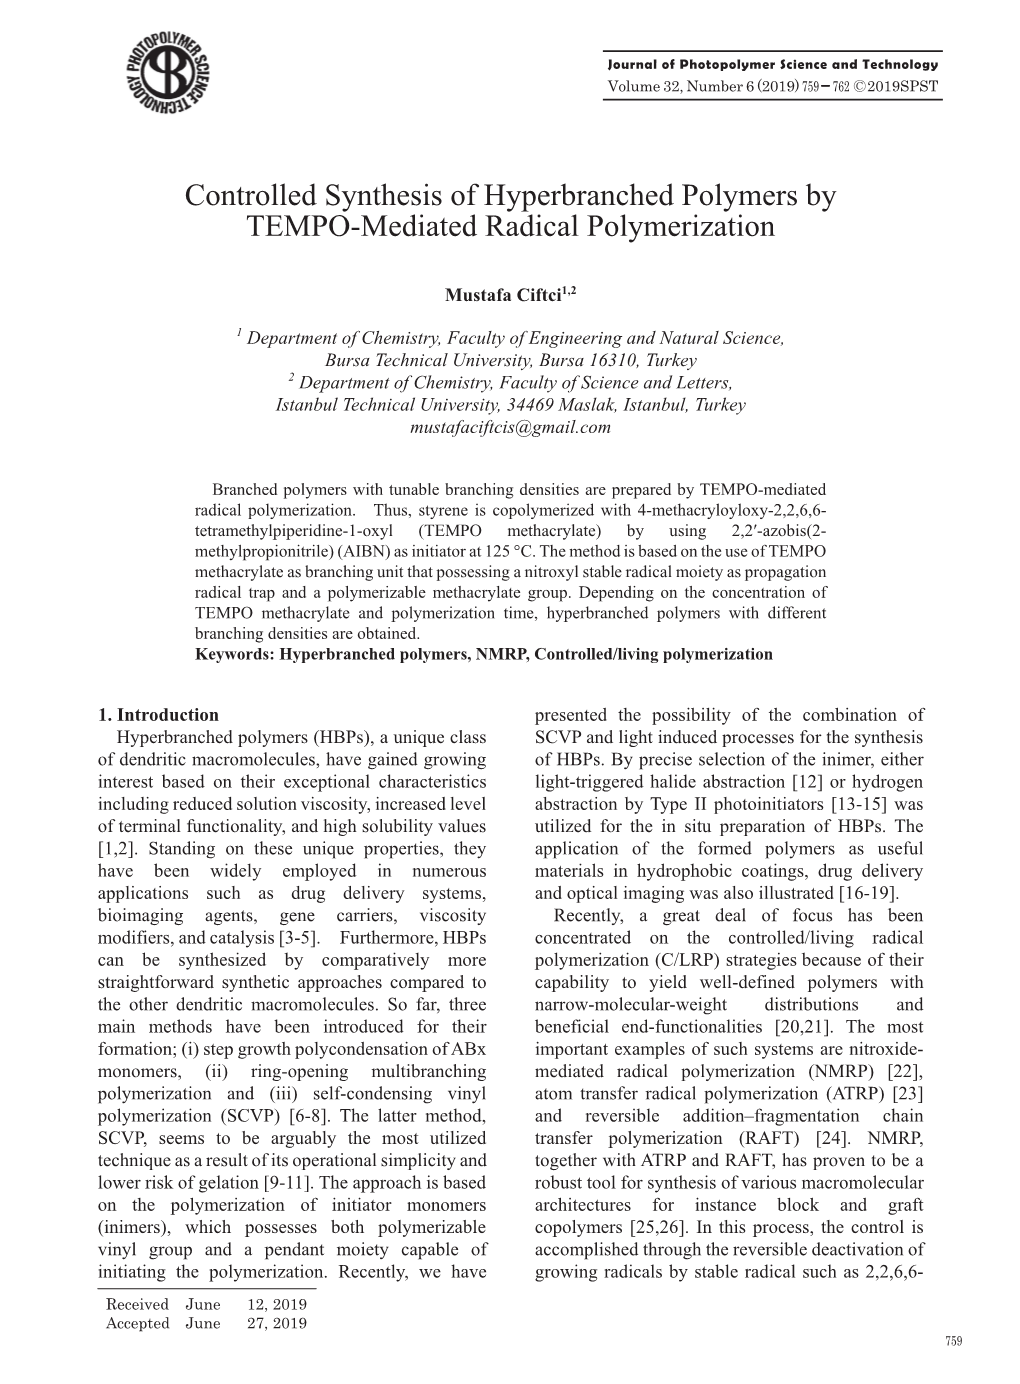 Controlled Synthesis of Hyperbranched Polymers by TEMPO-Mediated Radical Polymerization